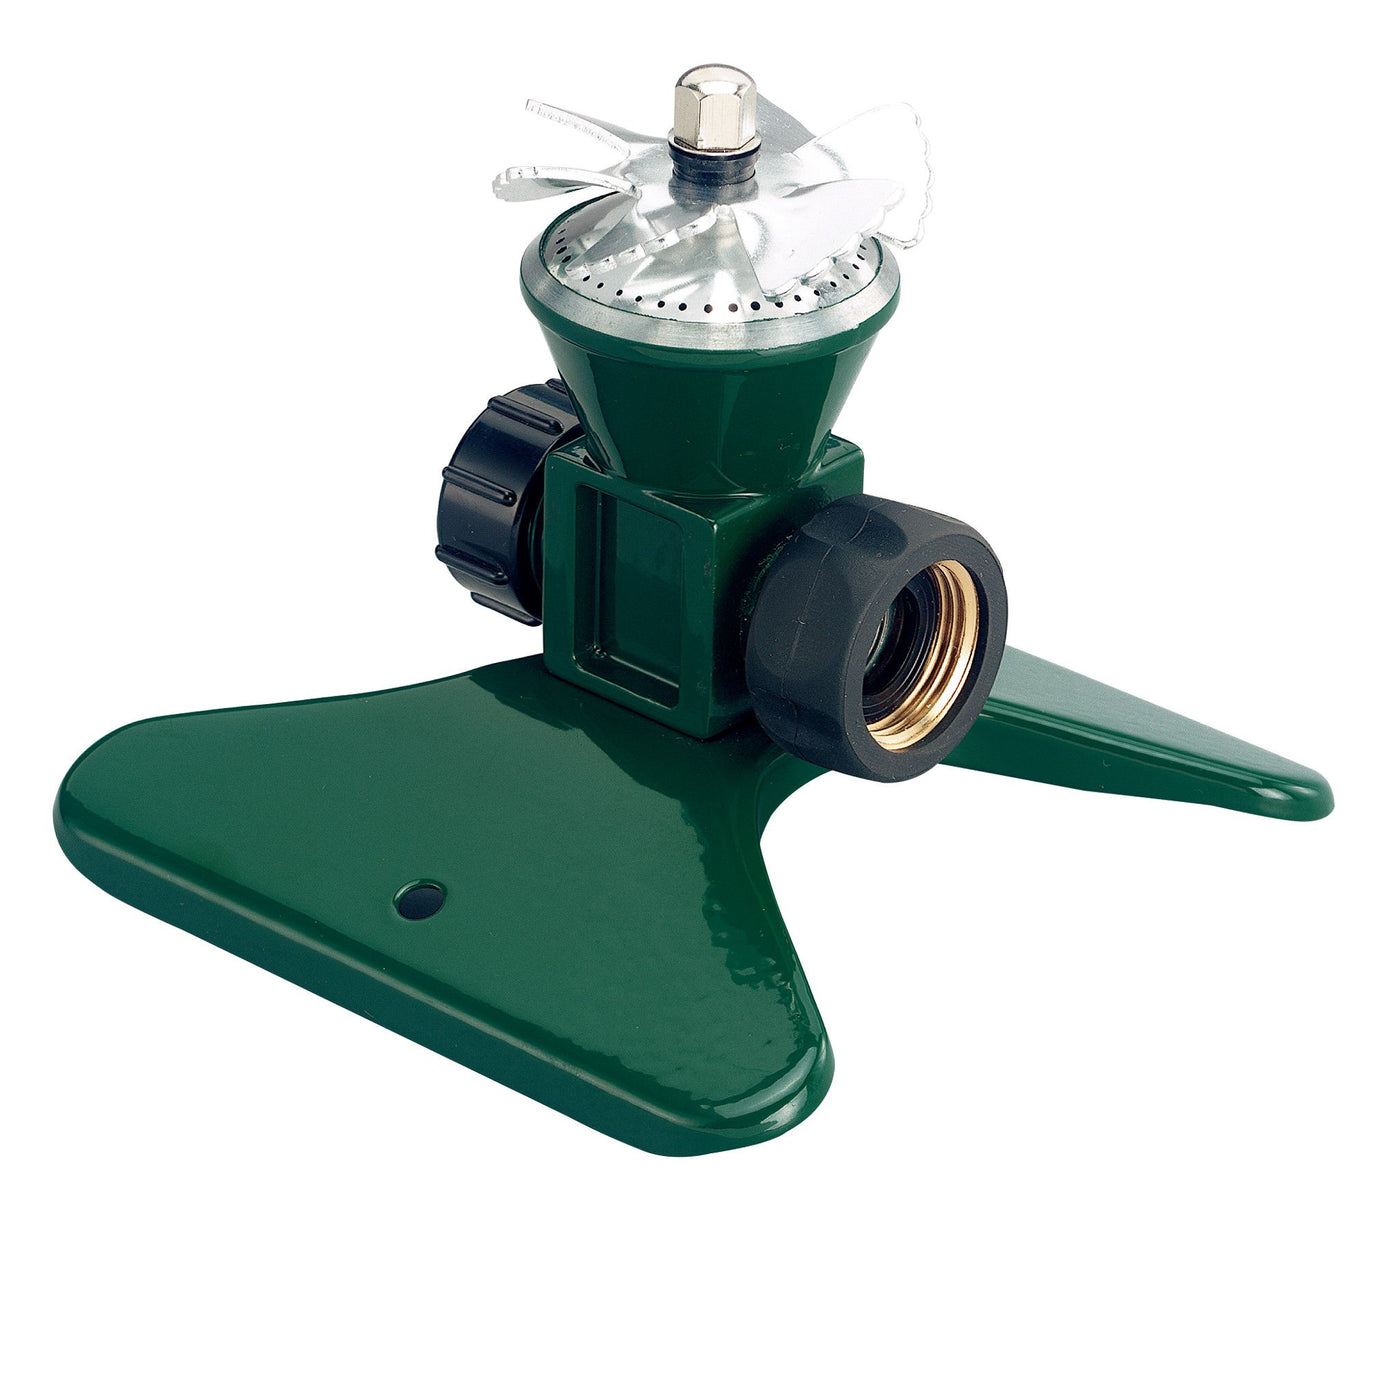 Cyclone two rotating sprinkler in green and black.